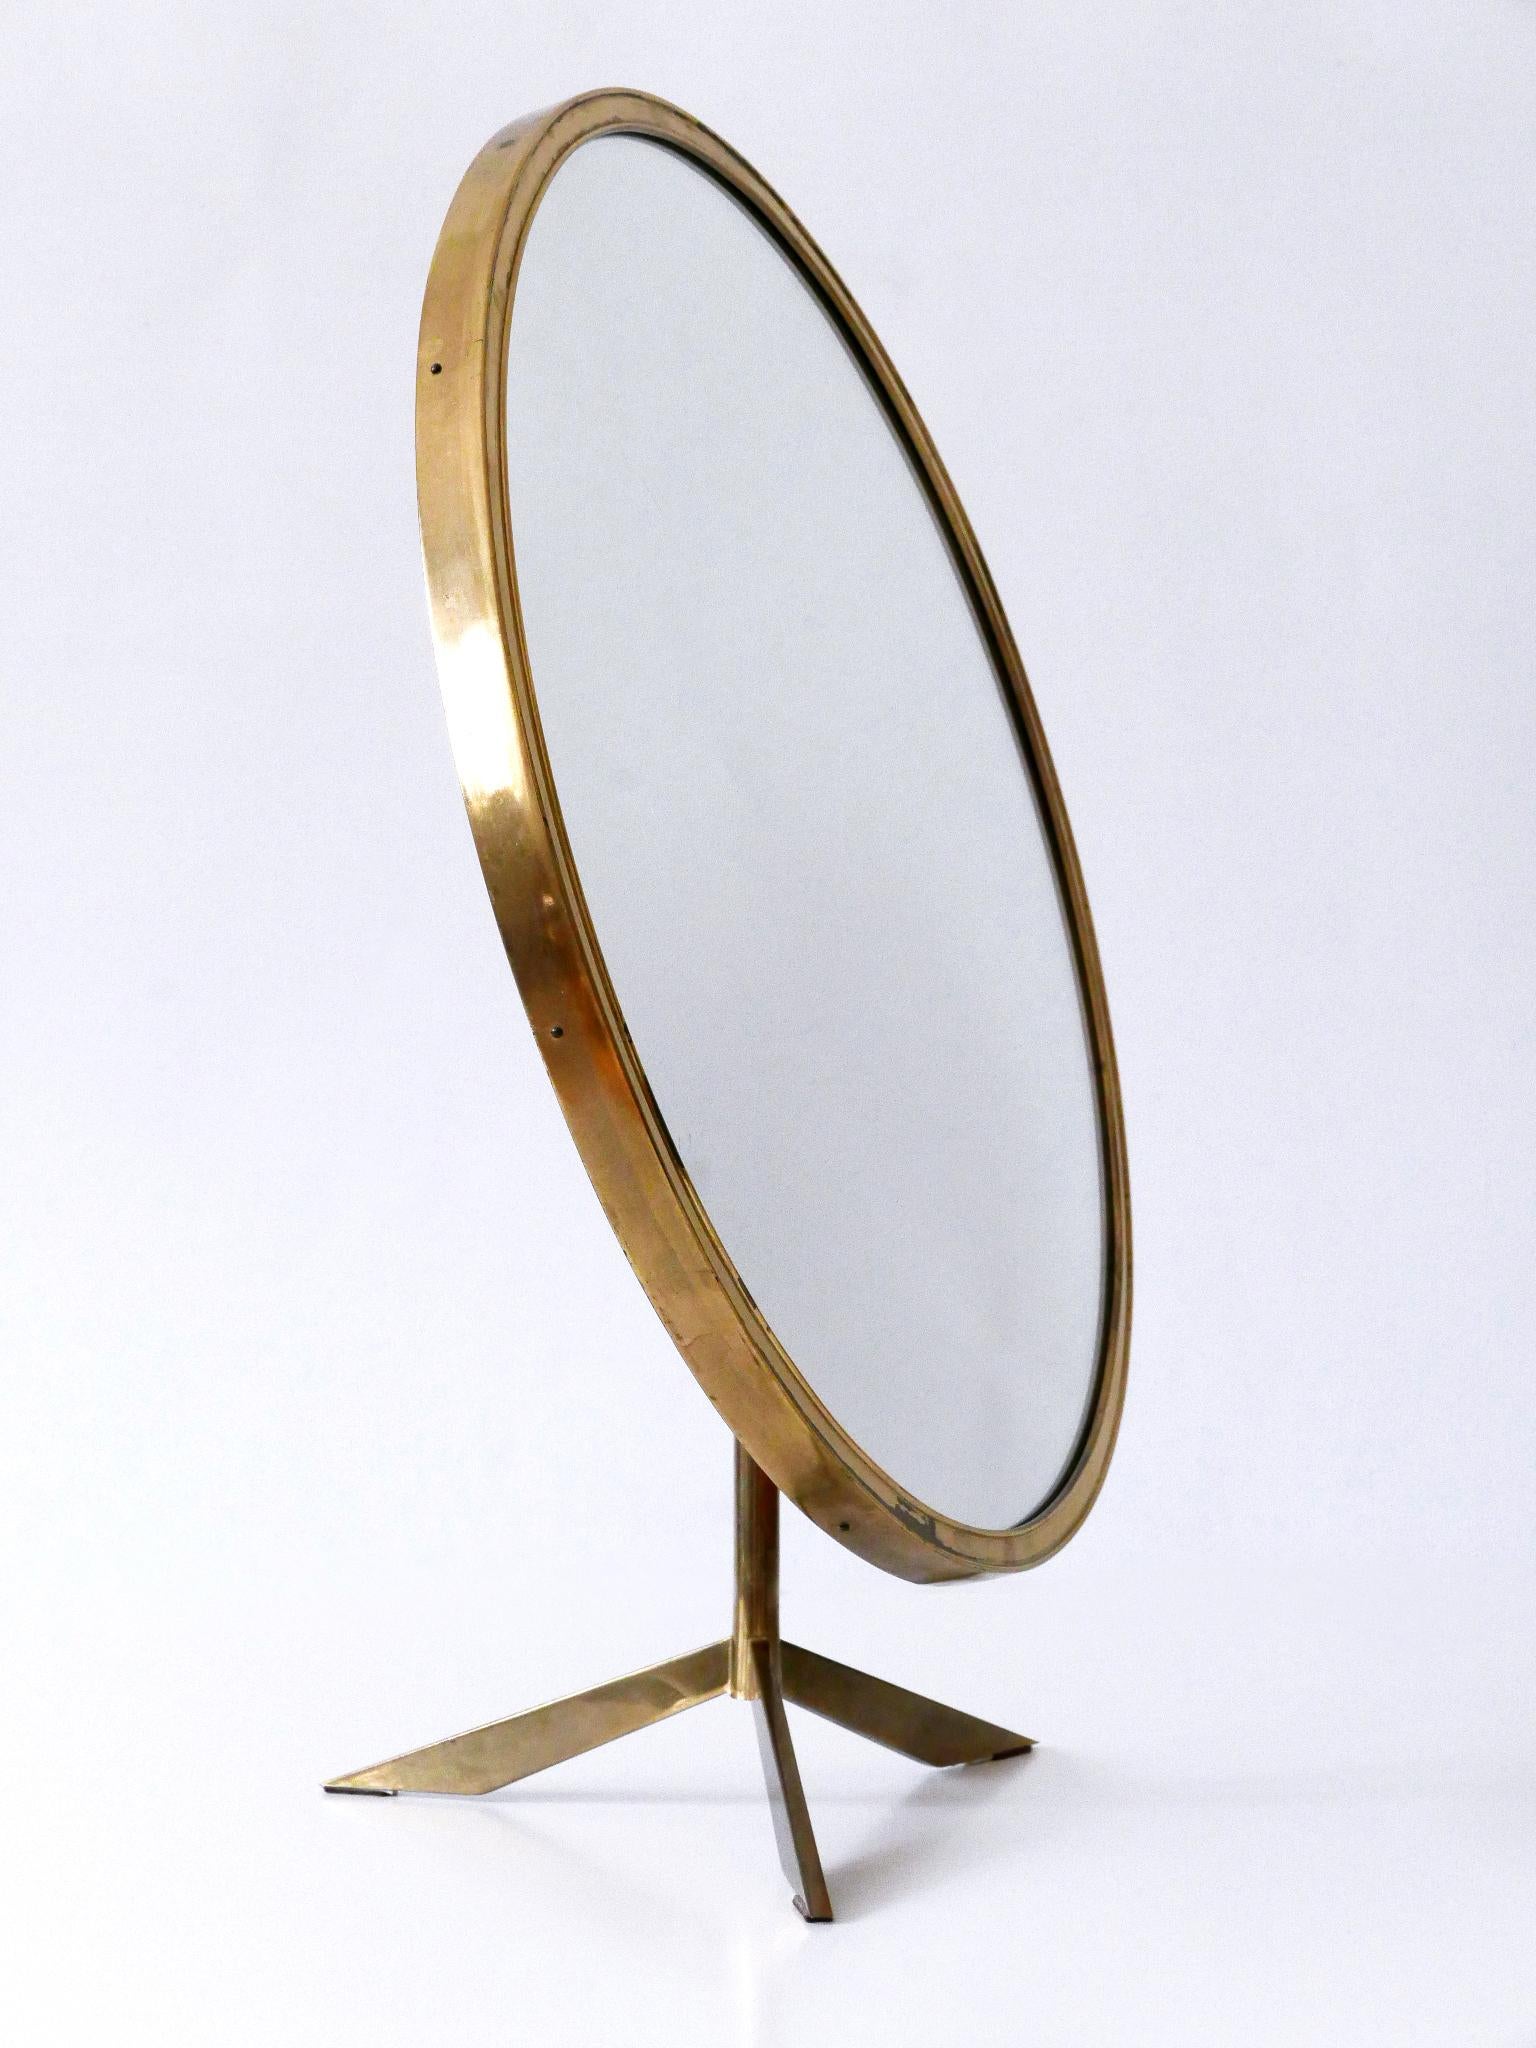 Brass Elegant Mid-Century Modern Wall or Vanity Mirror by Zierform Germany 1950s For Sale